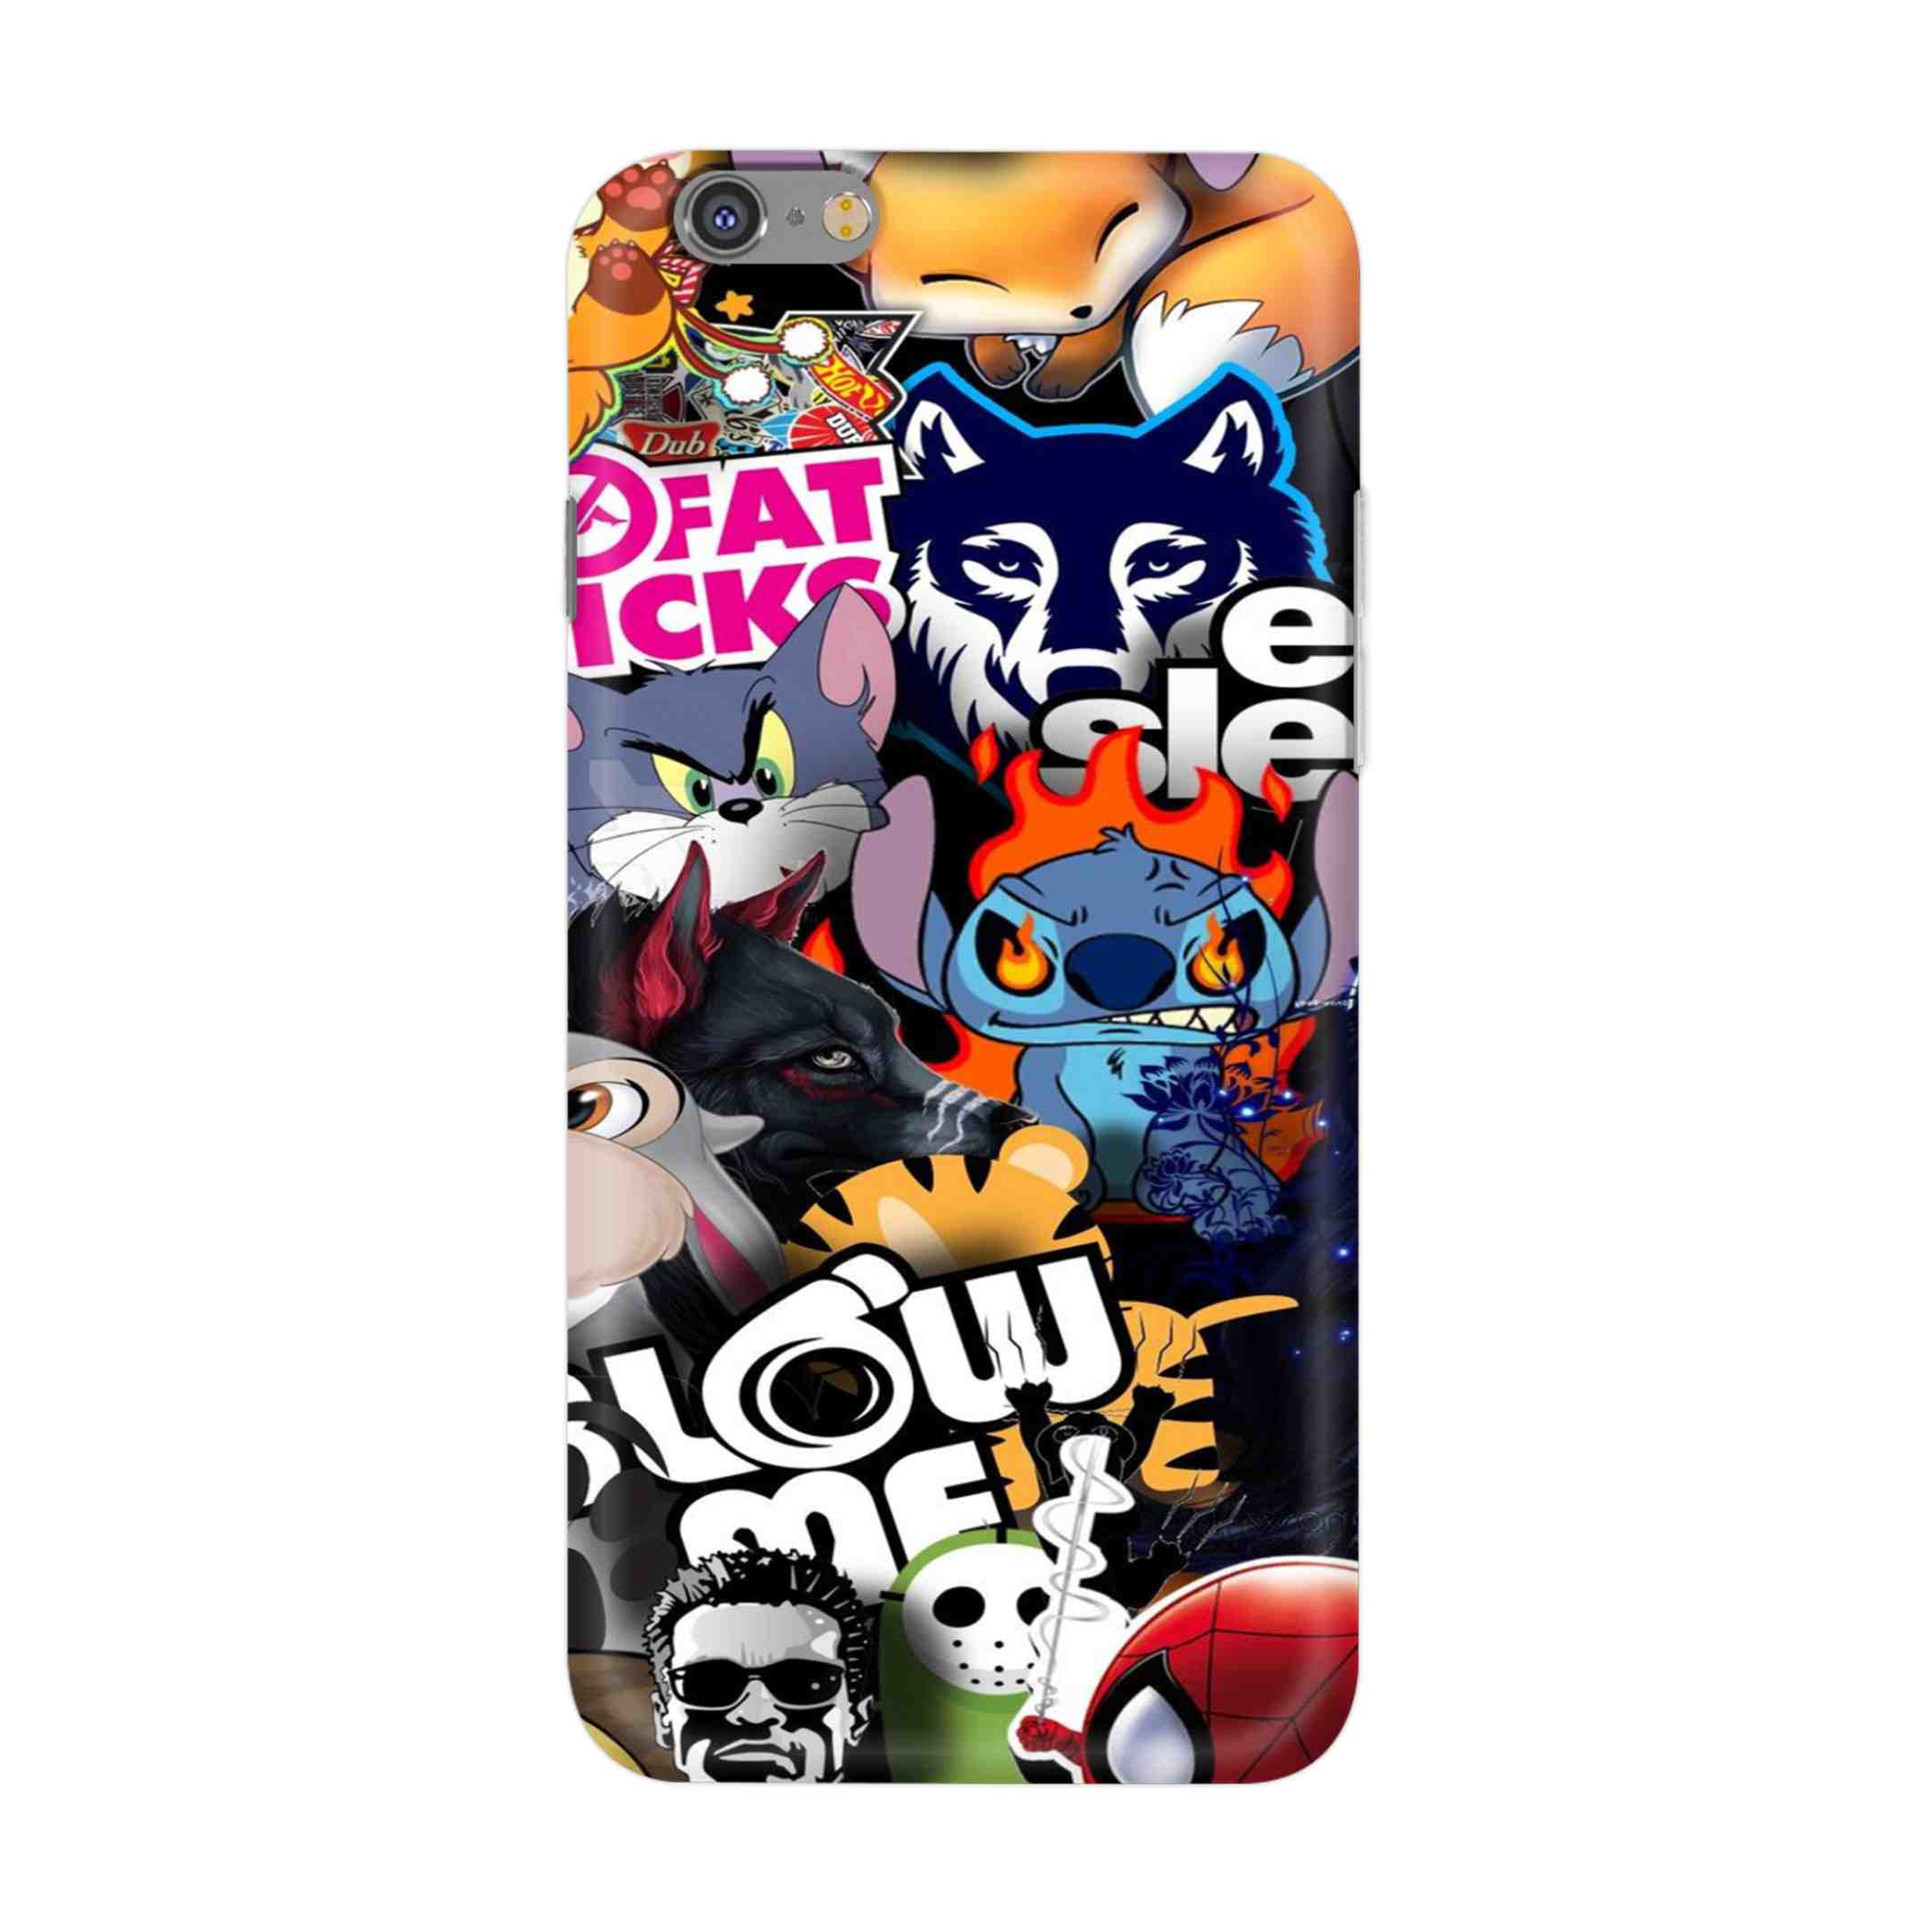 Buy Blow Me Hard Back Mobile Phone Case/Cover For iPhone 6 / 6s Online